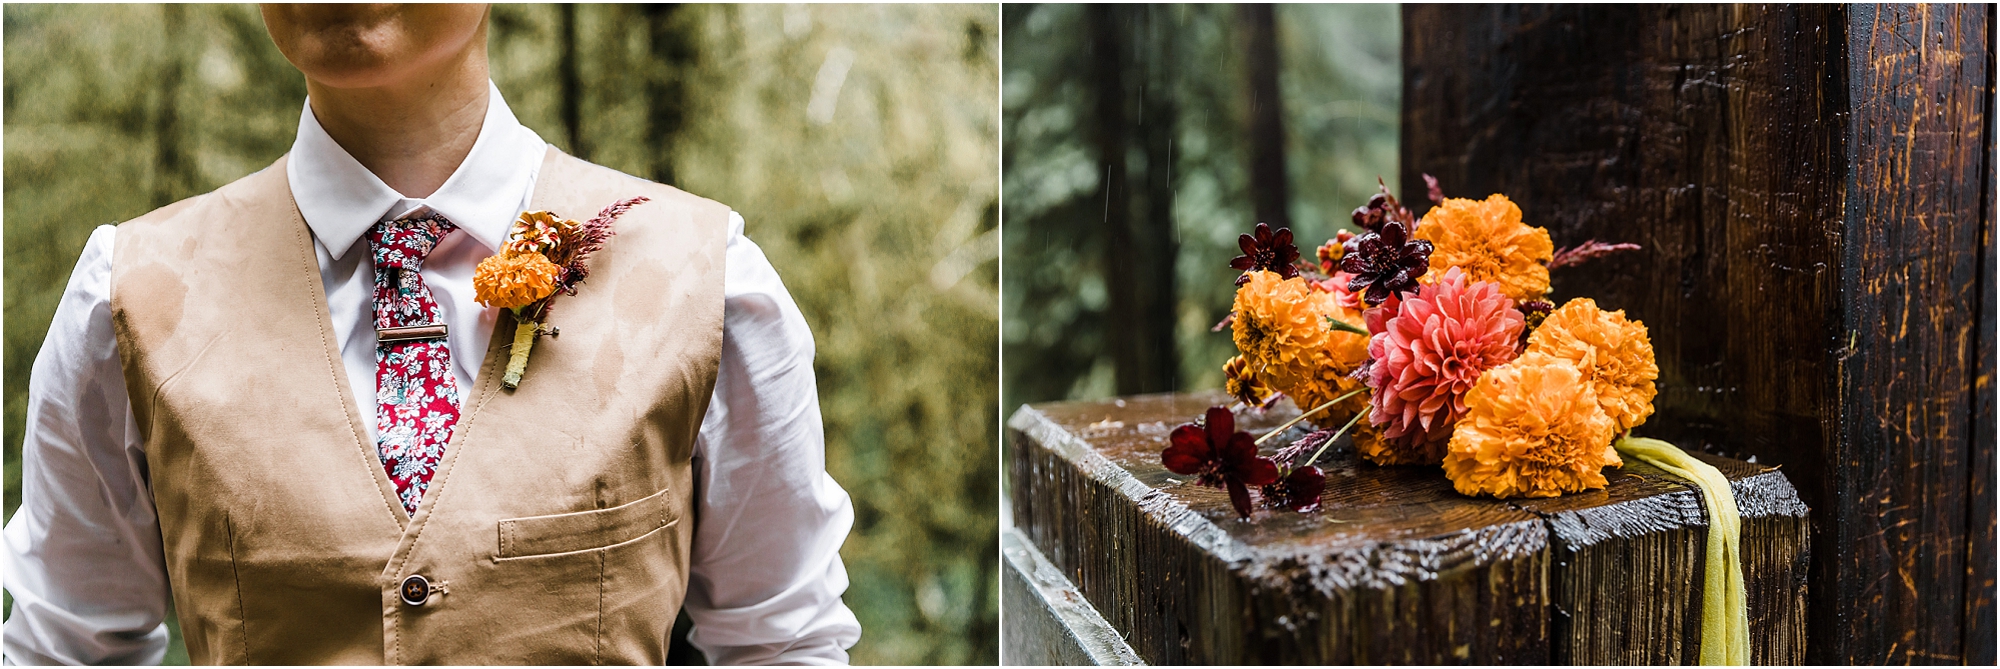 A gorgeous orange marigold bouquet and boutonniere for a PNW hiking adventure elopement in the Oregon coastal forest. | Erica Swantek Photography